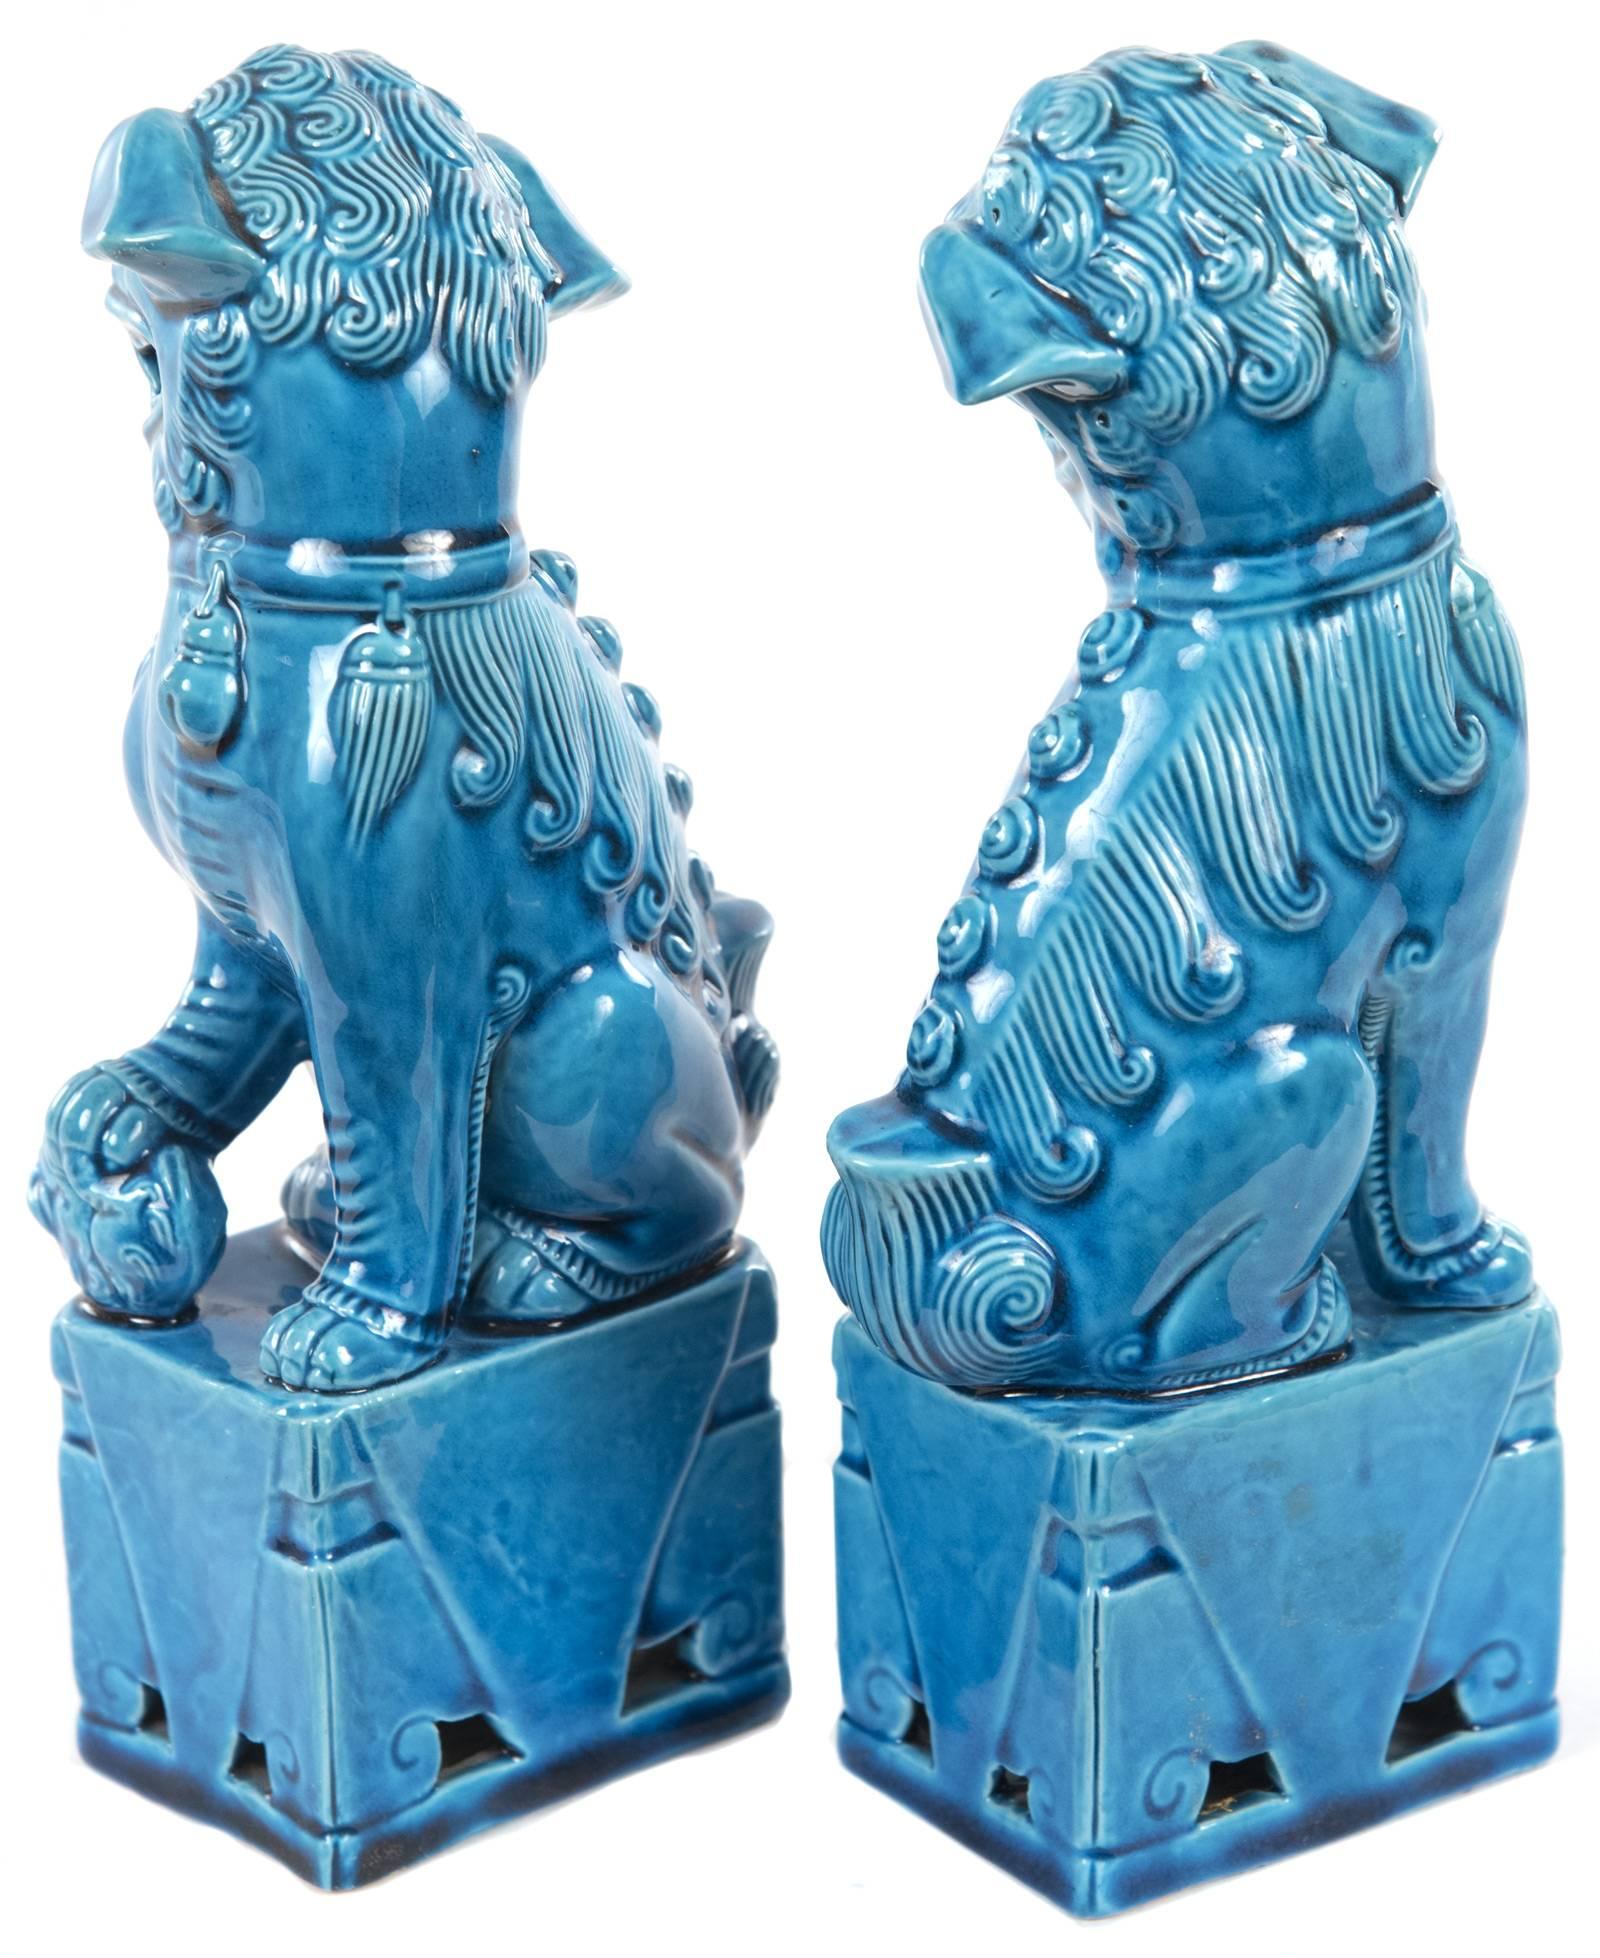 Each dog, and its square plinth, is covered in a rich lustrous turquoise glaze which darkens as it pools in the recesses, adding depth to the sculpture. Chinese Foo dogs are creatures with bodies that are comprised of half-lion, half-dog,